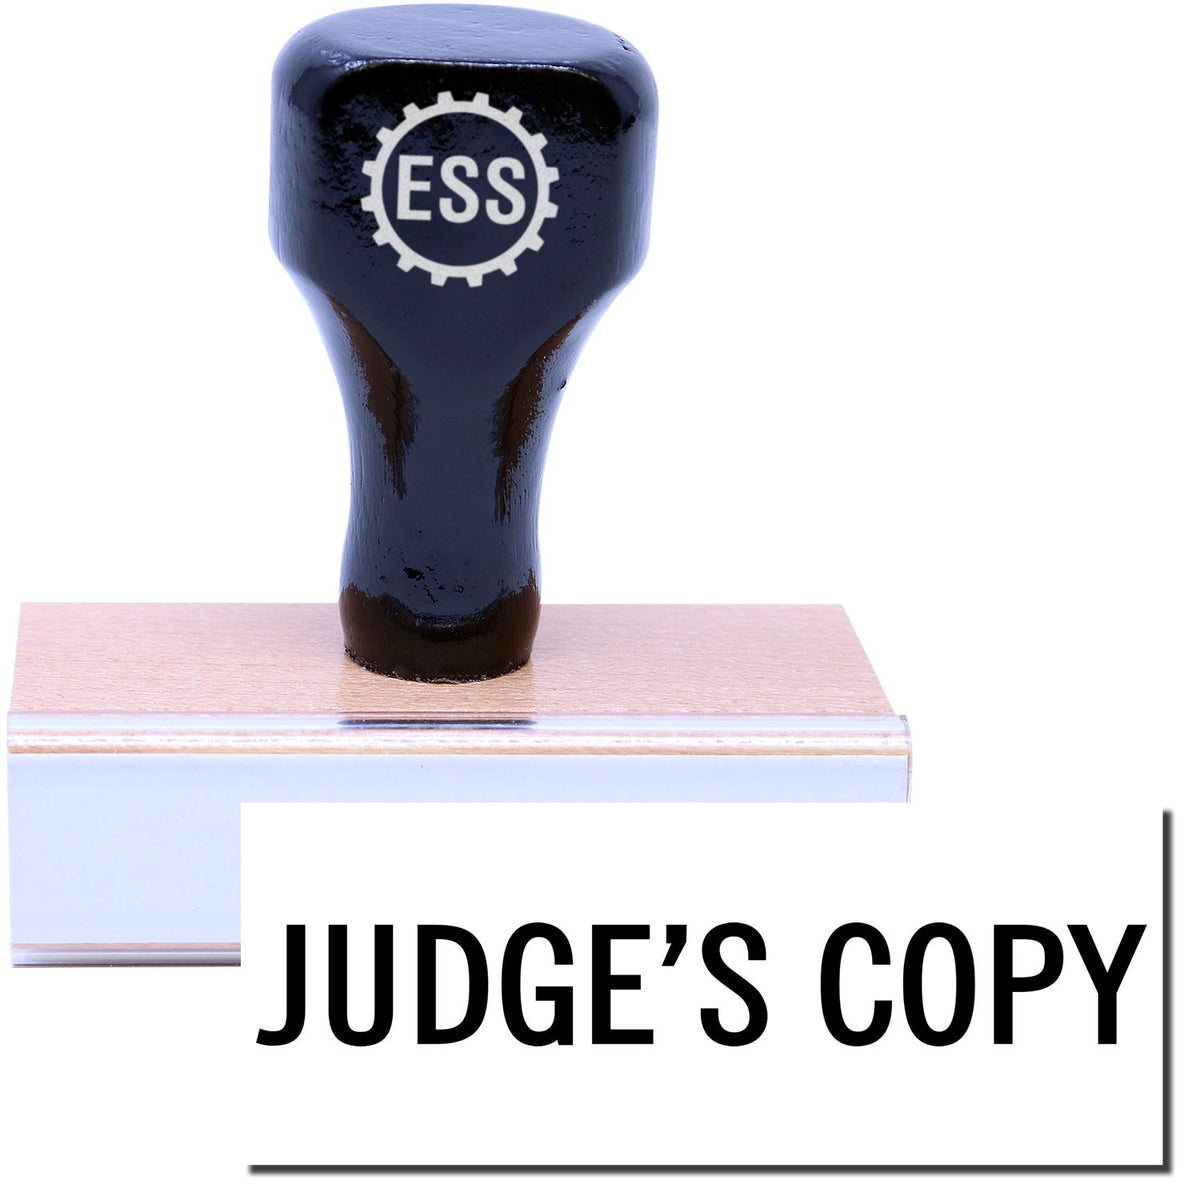 A stock office rubber stamp with a stamped image showing how the text &quot;JUDGE&#39;S COPY&quot; in a large font is displayed after stamping.